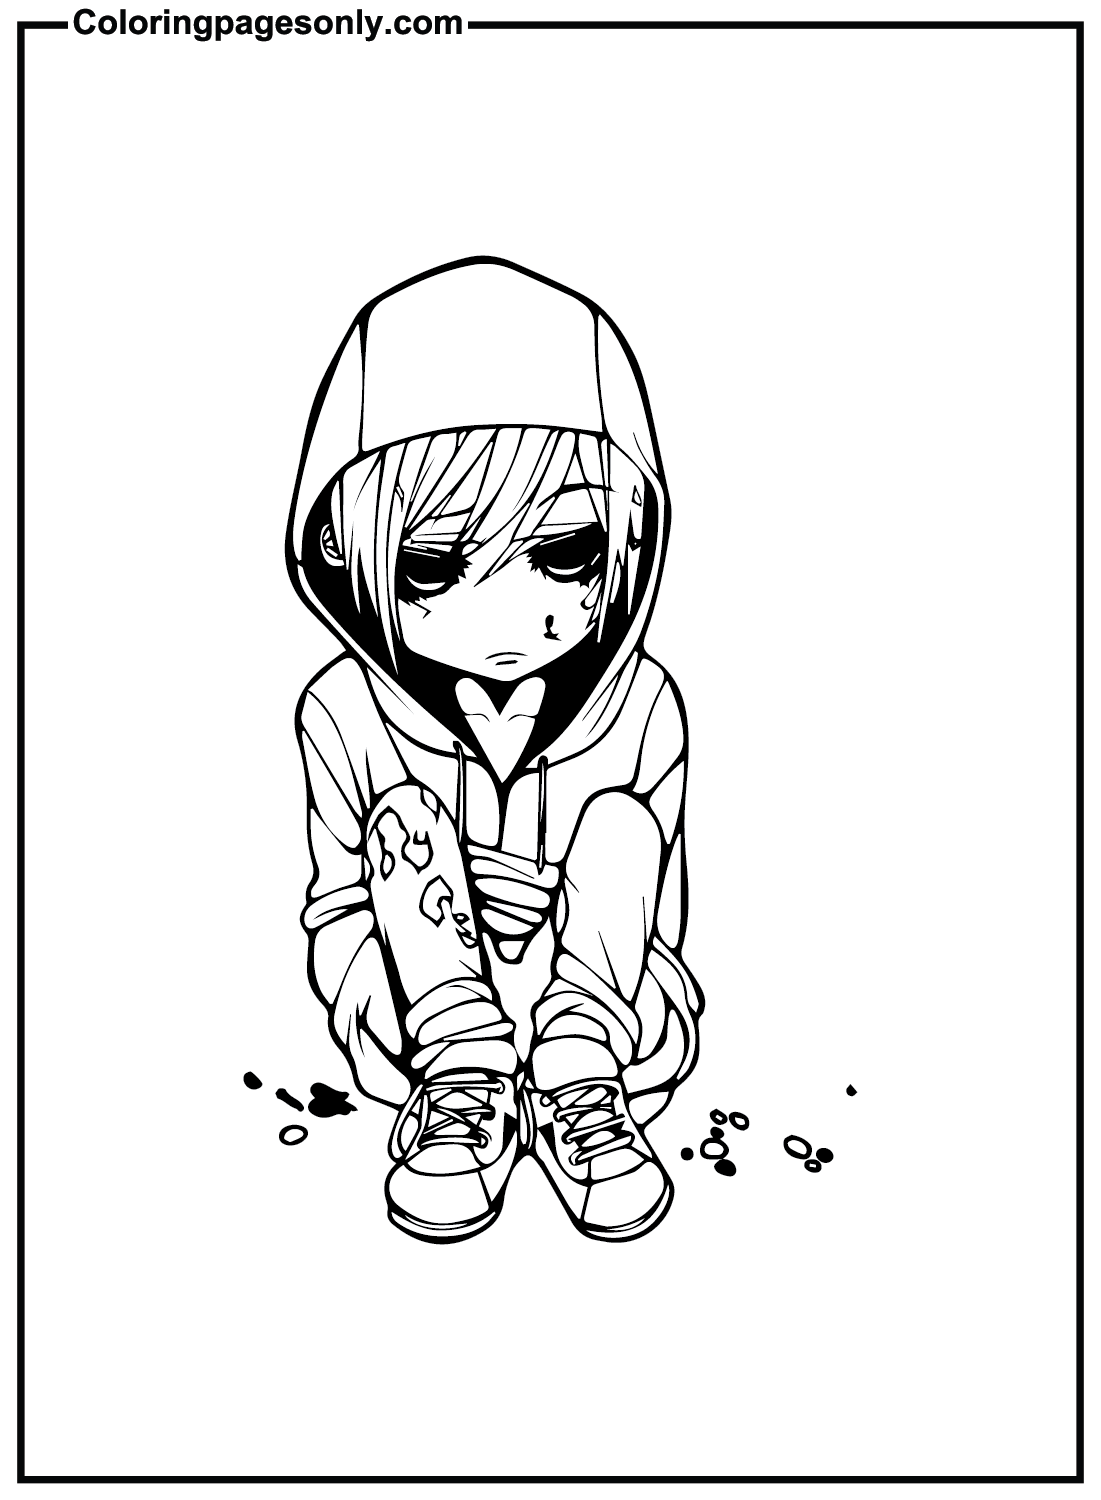 Emo To Download Coloring Pages